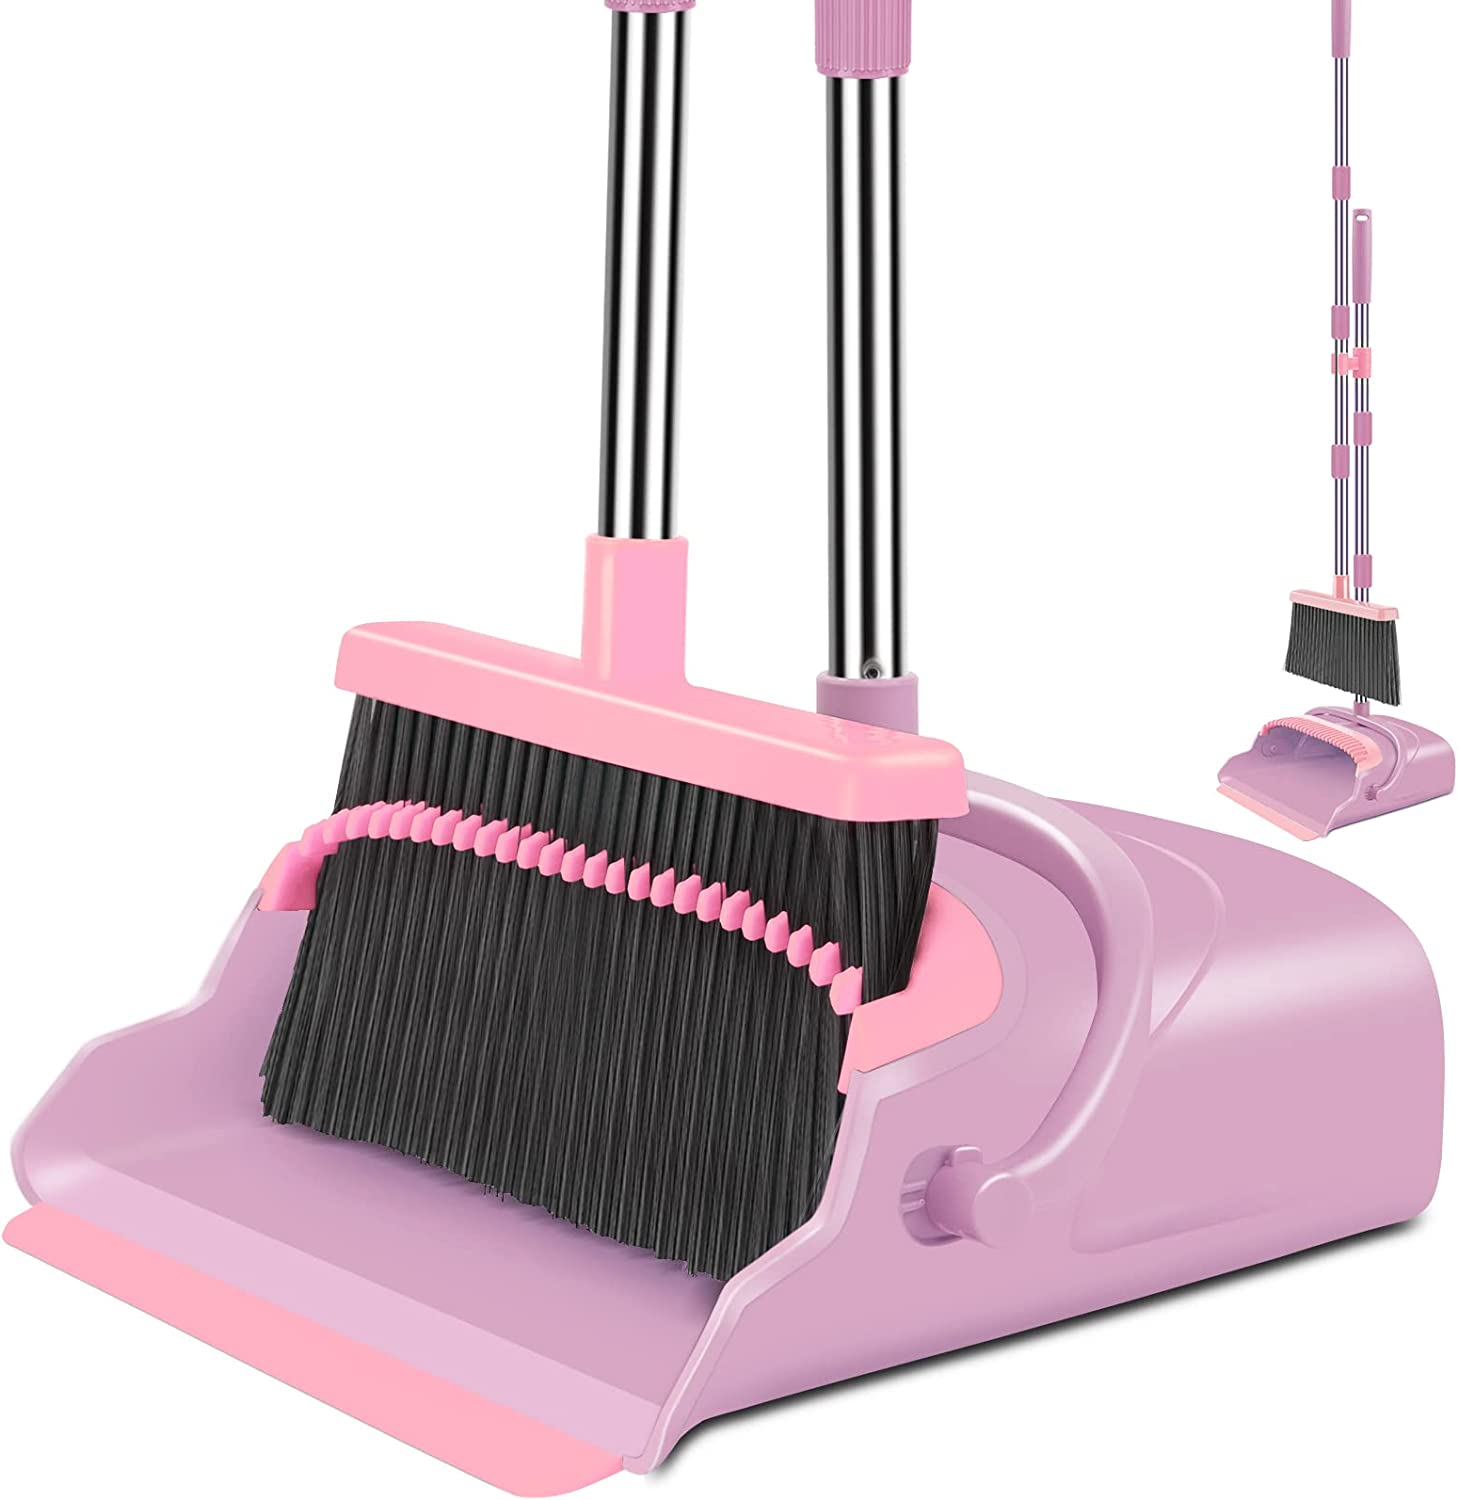 Broom Dustpan Set And Home Handle Long Dust Brush Pan Cleaning Outdoor Indoor Pink